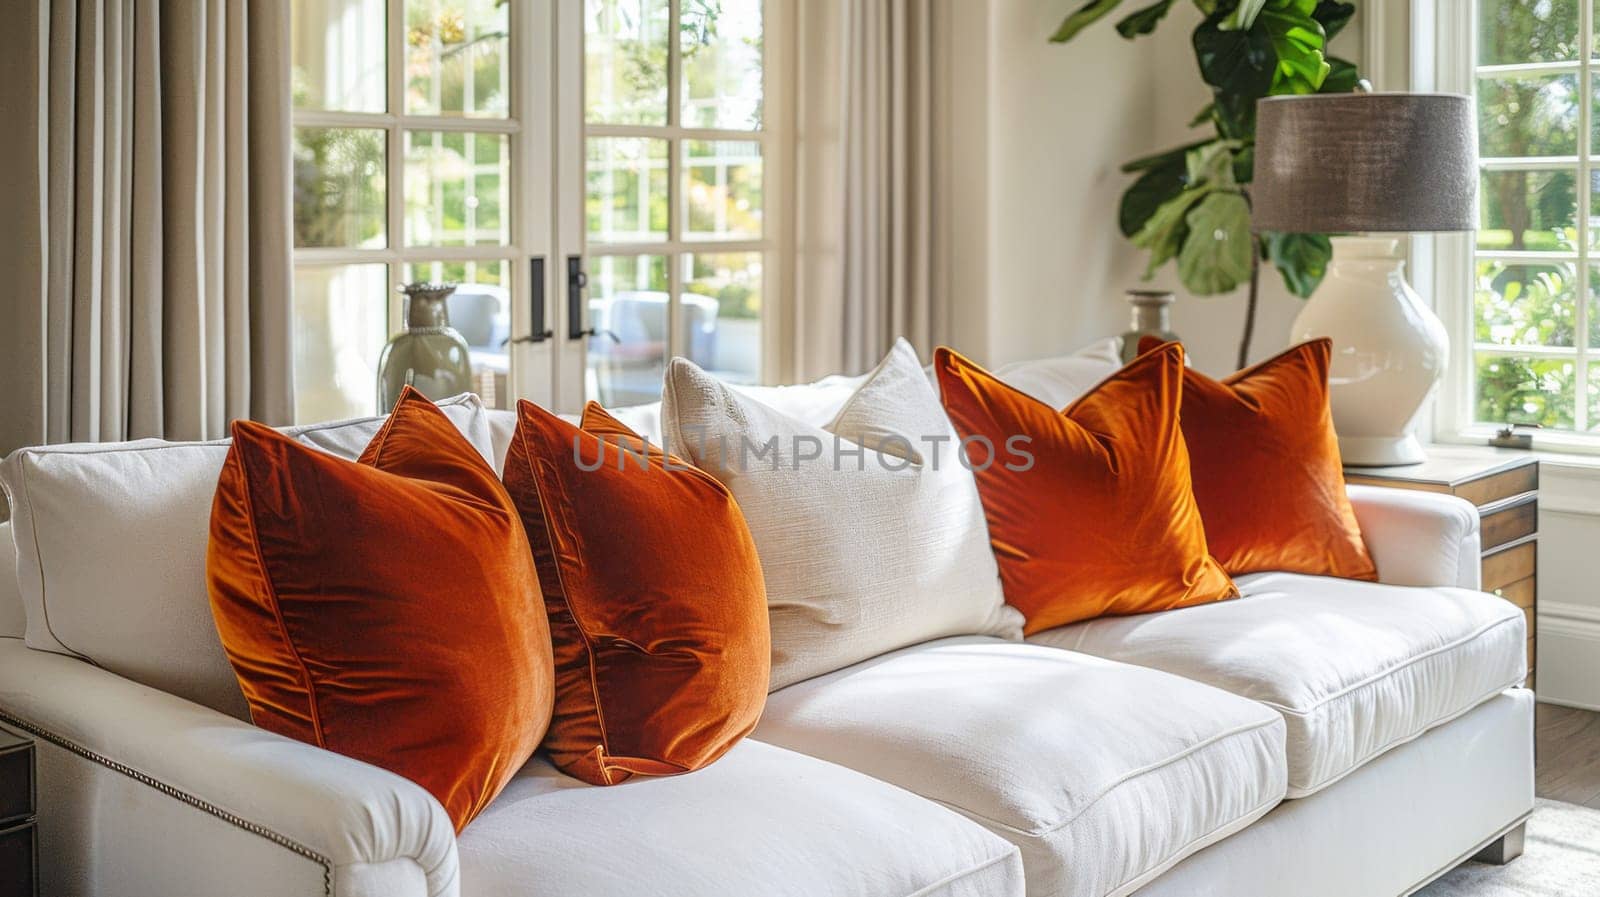 Sofa with terracotta and beige pillows close-up in the living room.